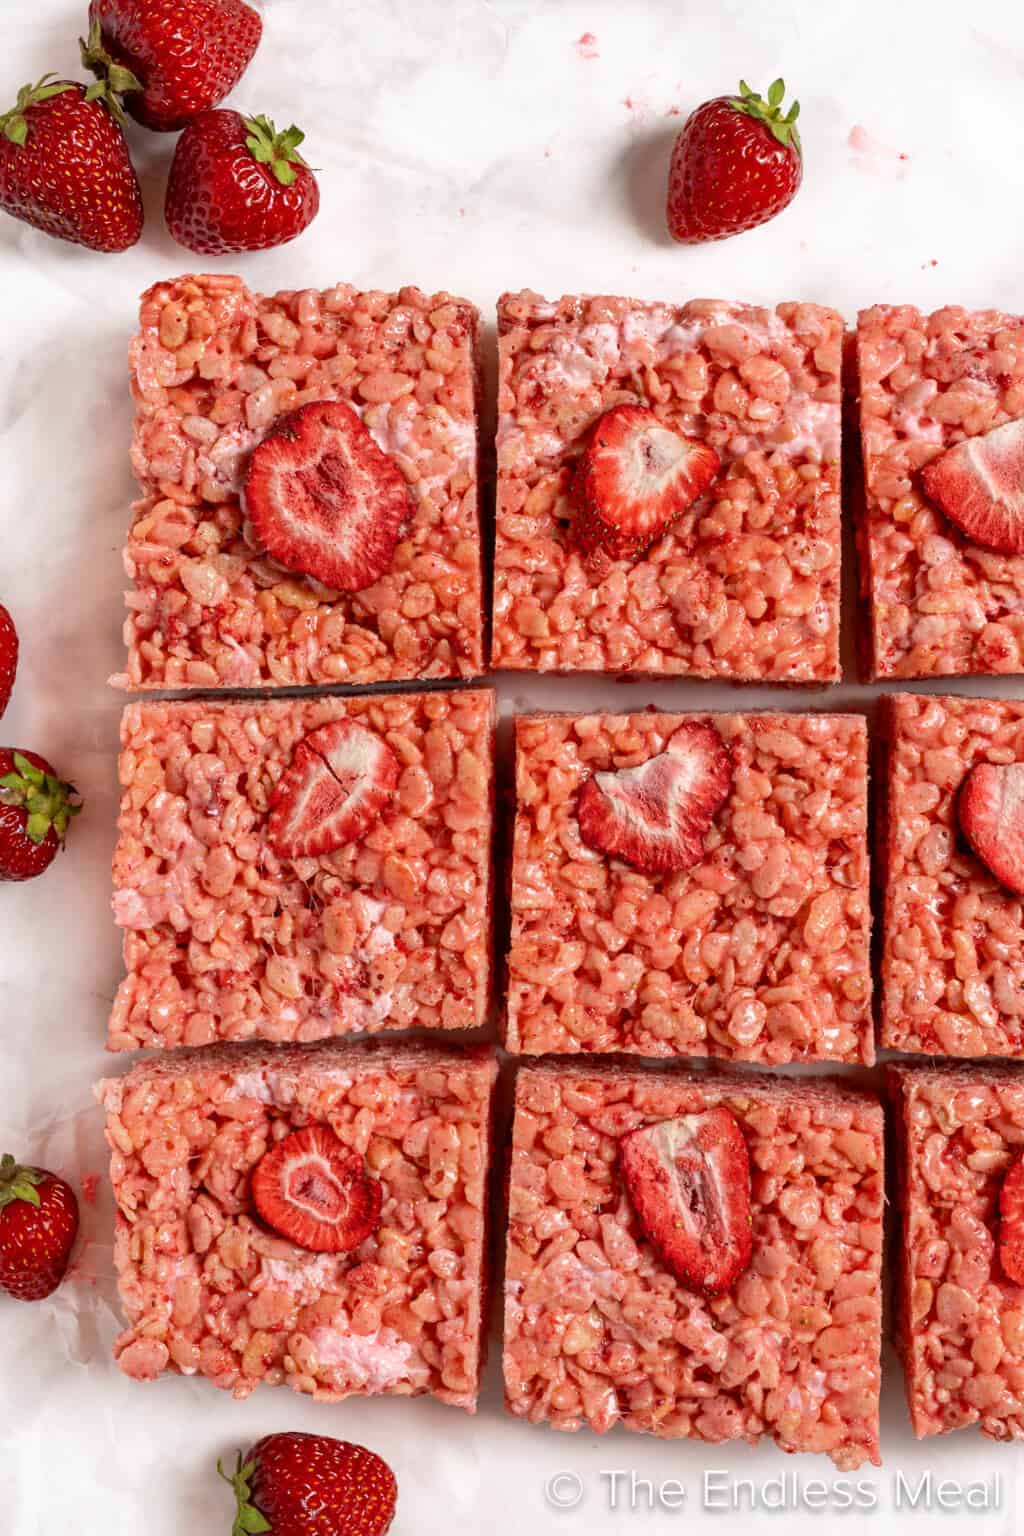 Strawberry Rice Krispie Squares topped with freeze dried strawberries.
